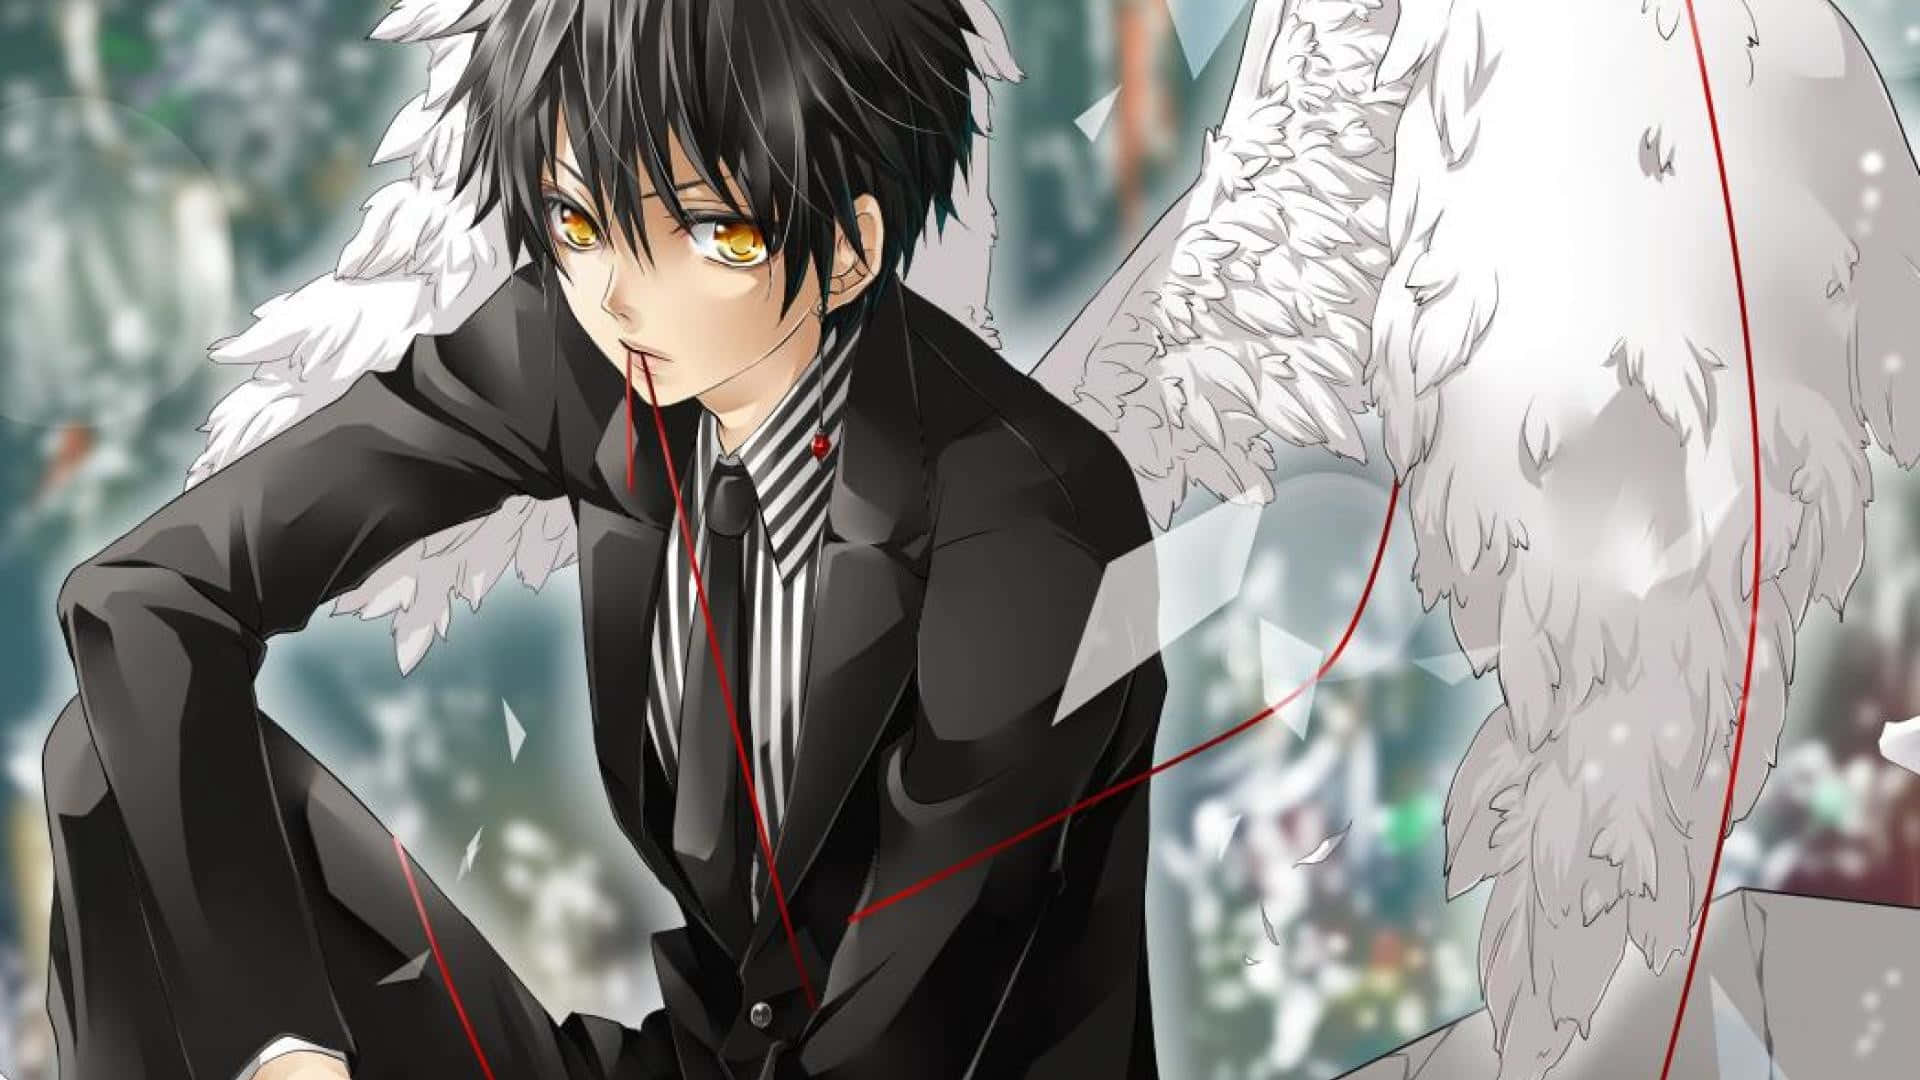 Cool Guy With Angel Wings Wallpaper